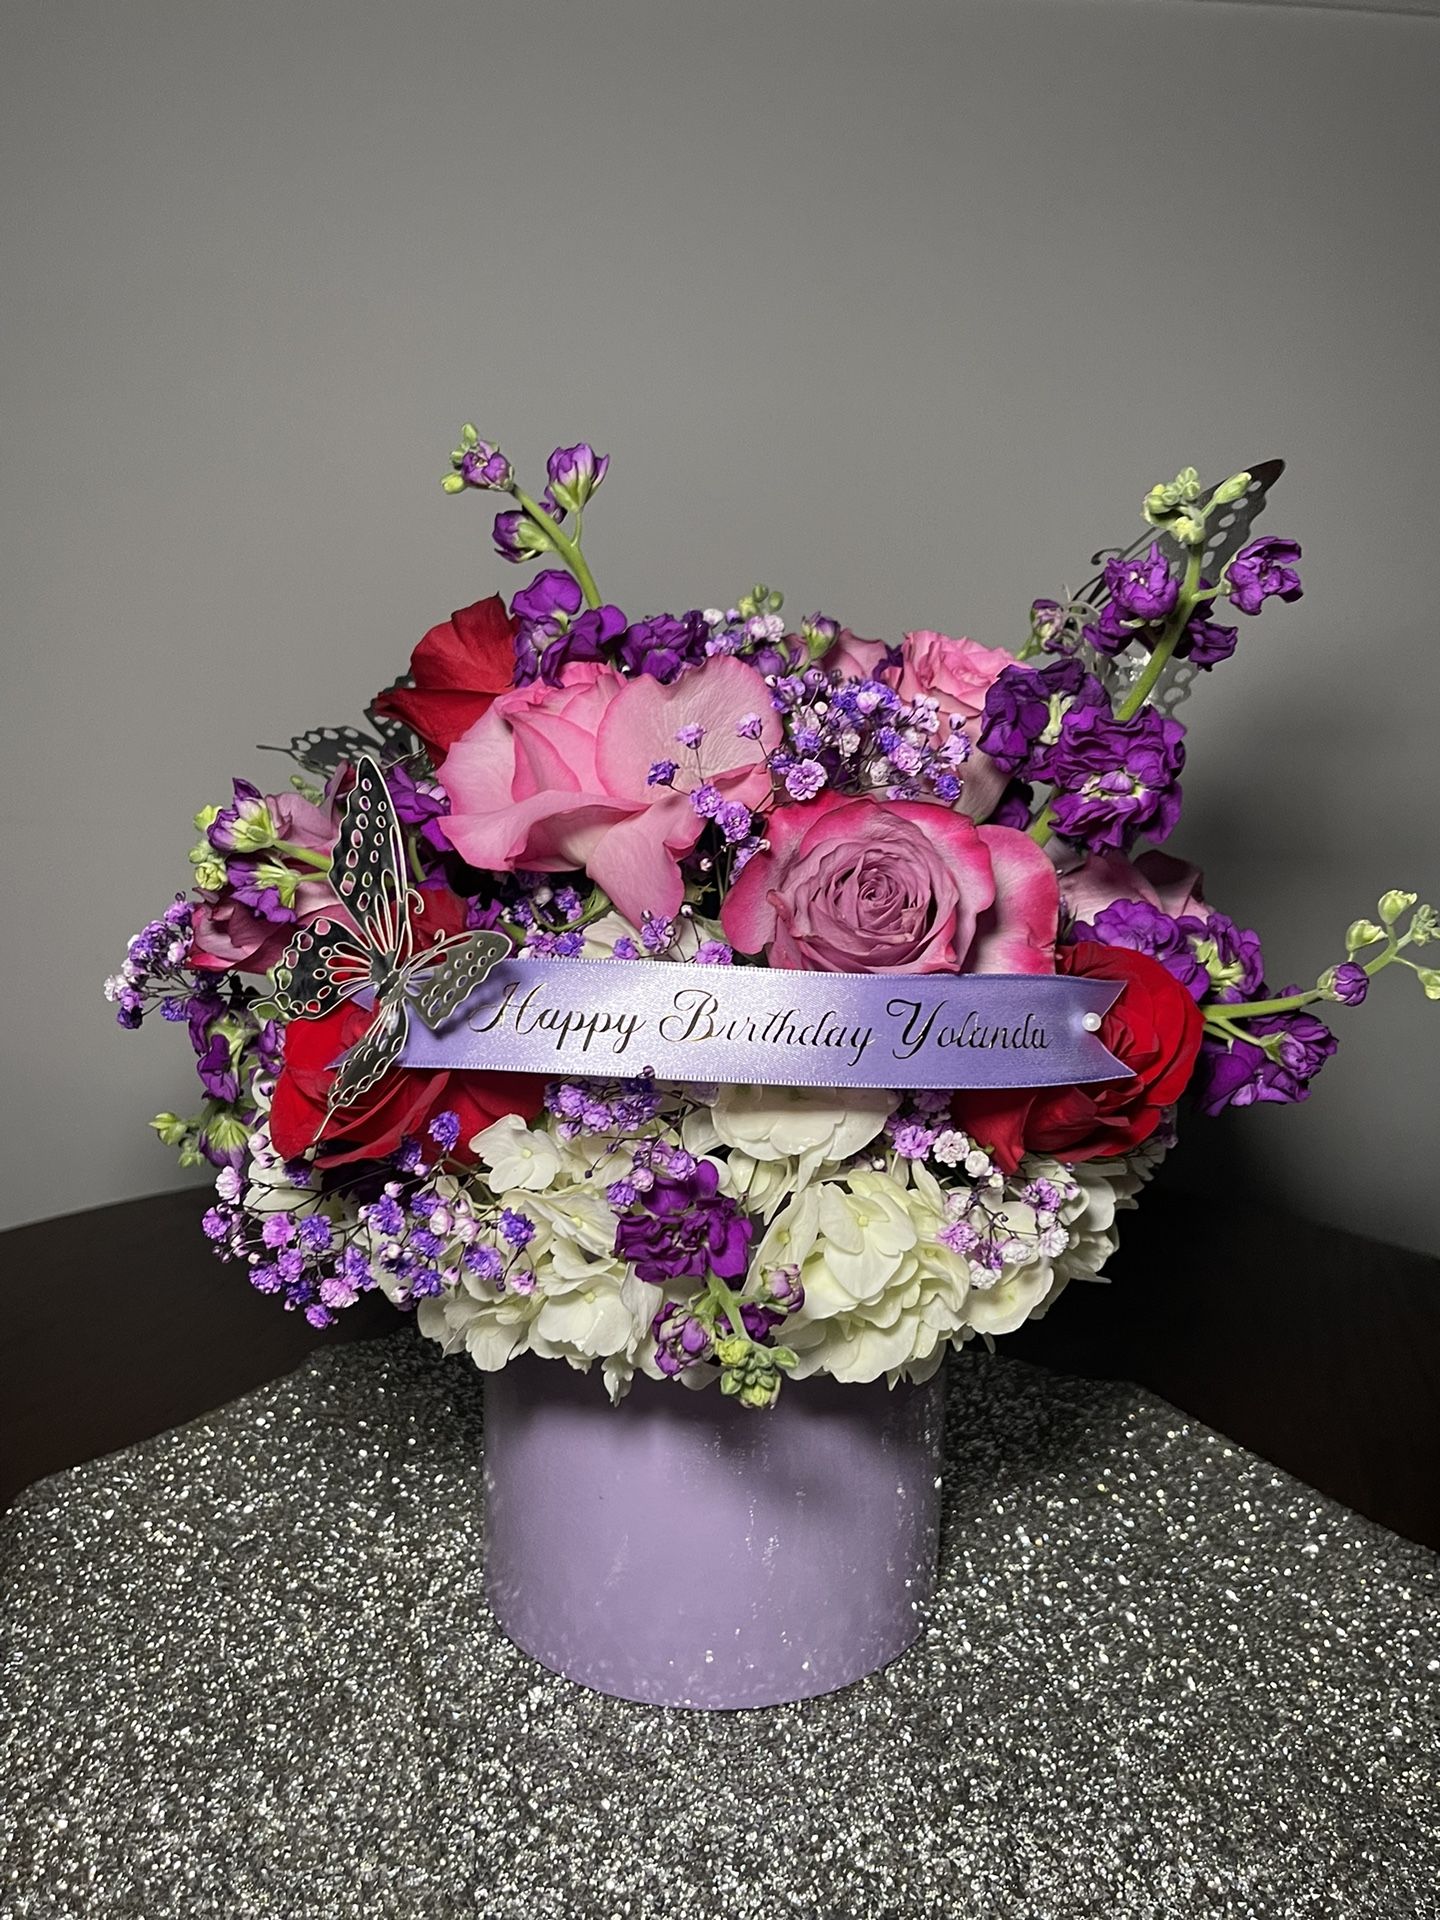 Mother’s Day floral gift Arrangements 